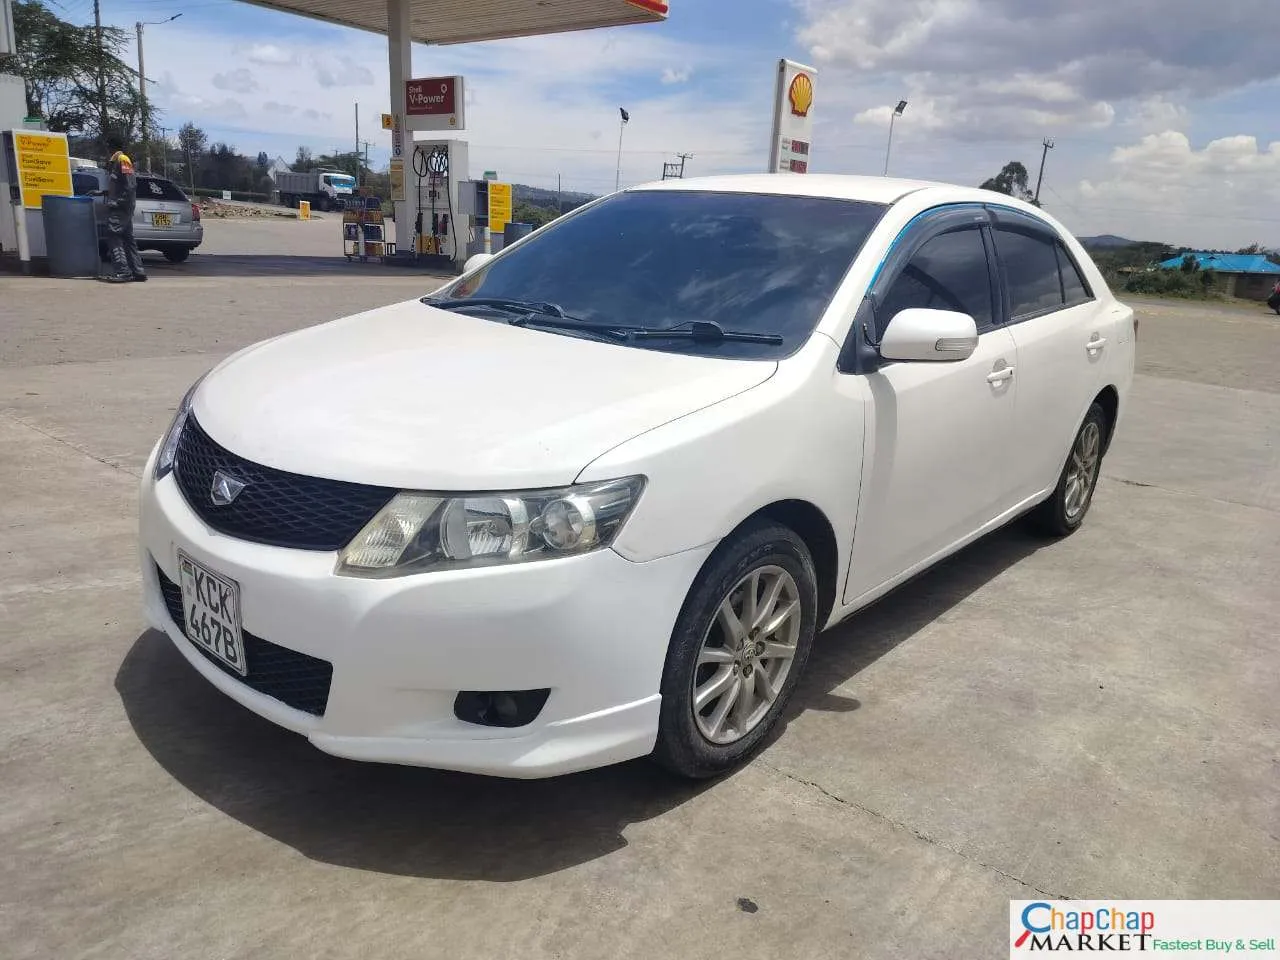 Cars Cars For Sale-Toyota Allion kenya You Pay 30% Deposit Toyota allion for sale in kenya hire purchase INSTALLMENTS Trade in OK EXCLUSIVE 9